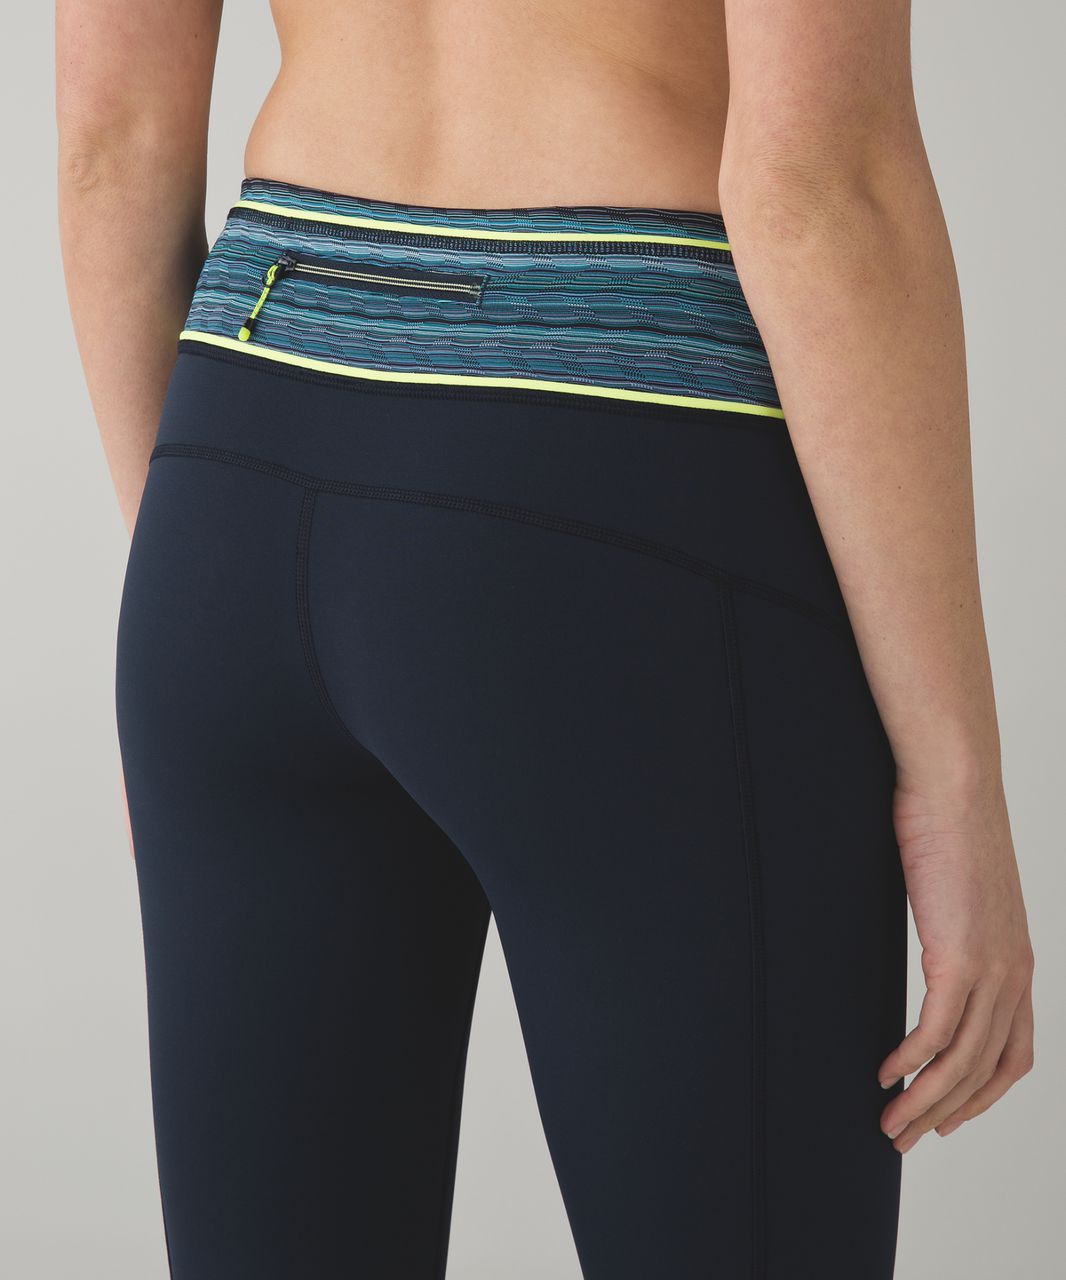 Lululemon Pace Queen Tight *Full-On Luxtreme - Inkwell / Space Dye Twist Naval Blue Peacock Blue